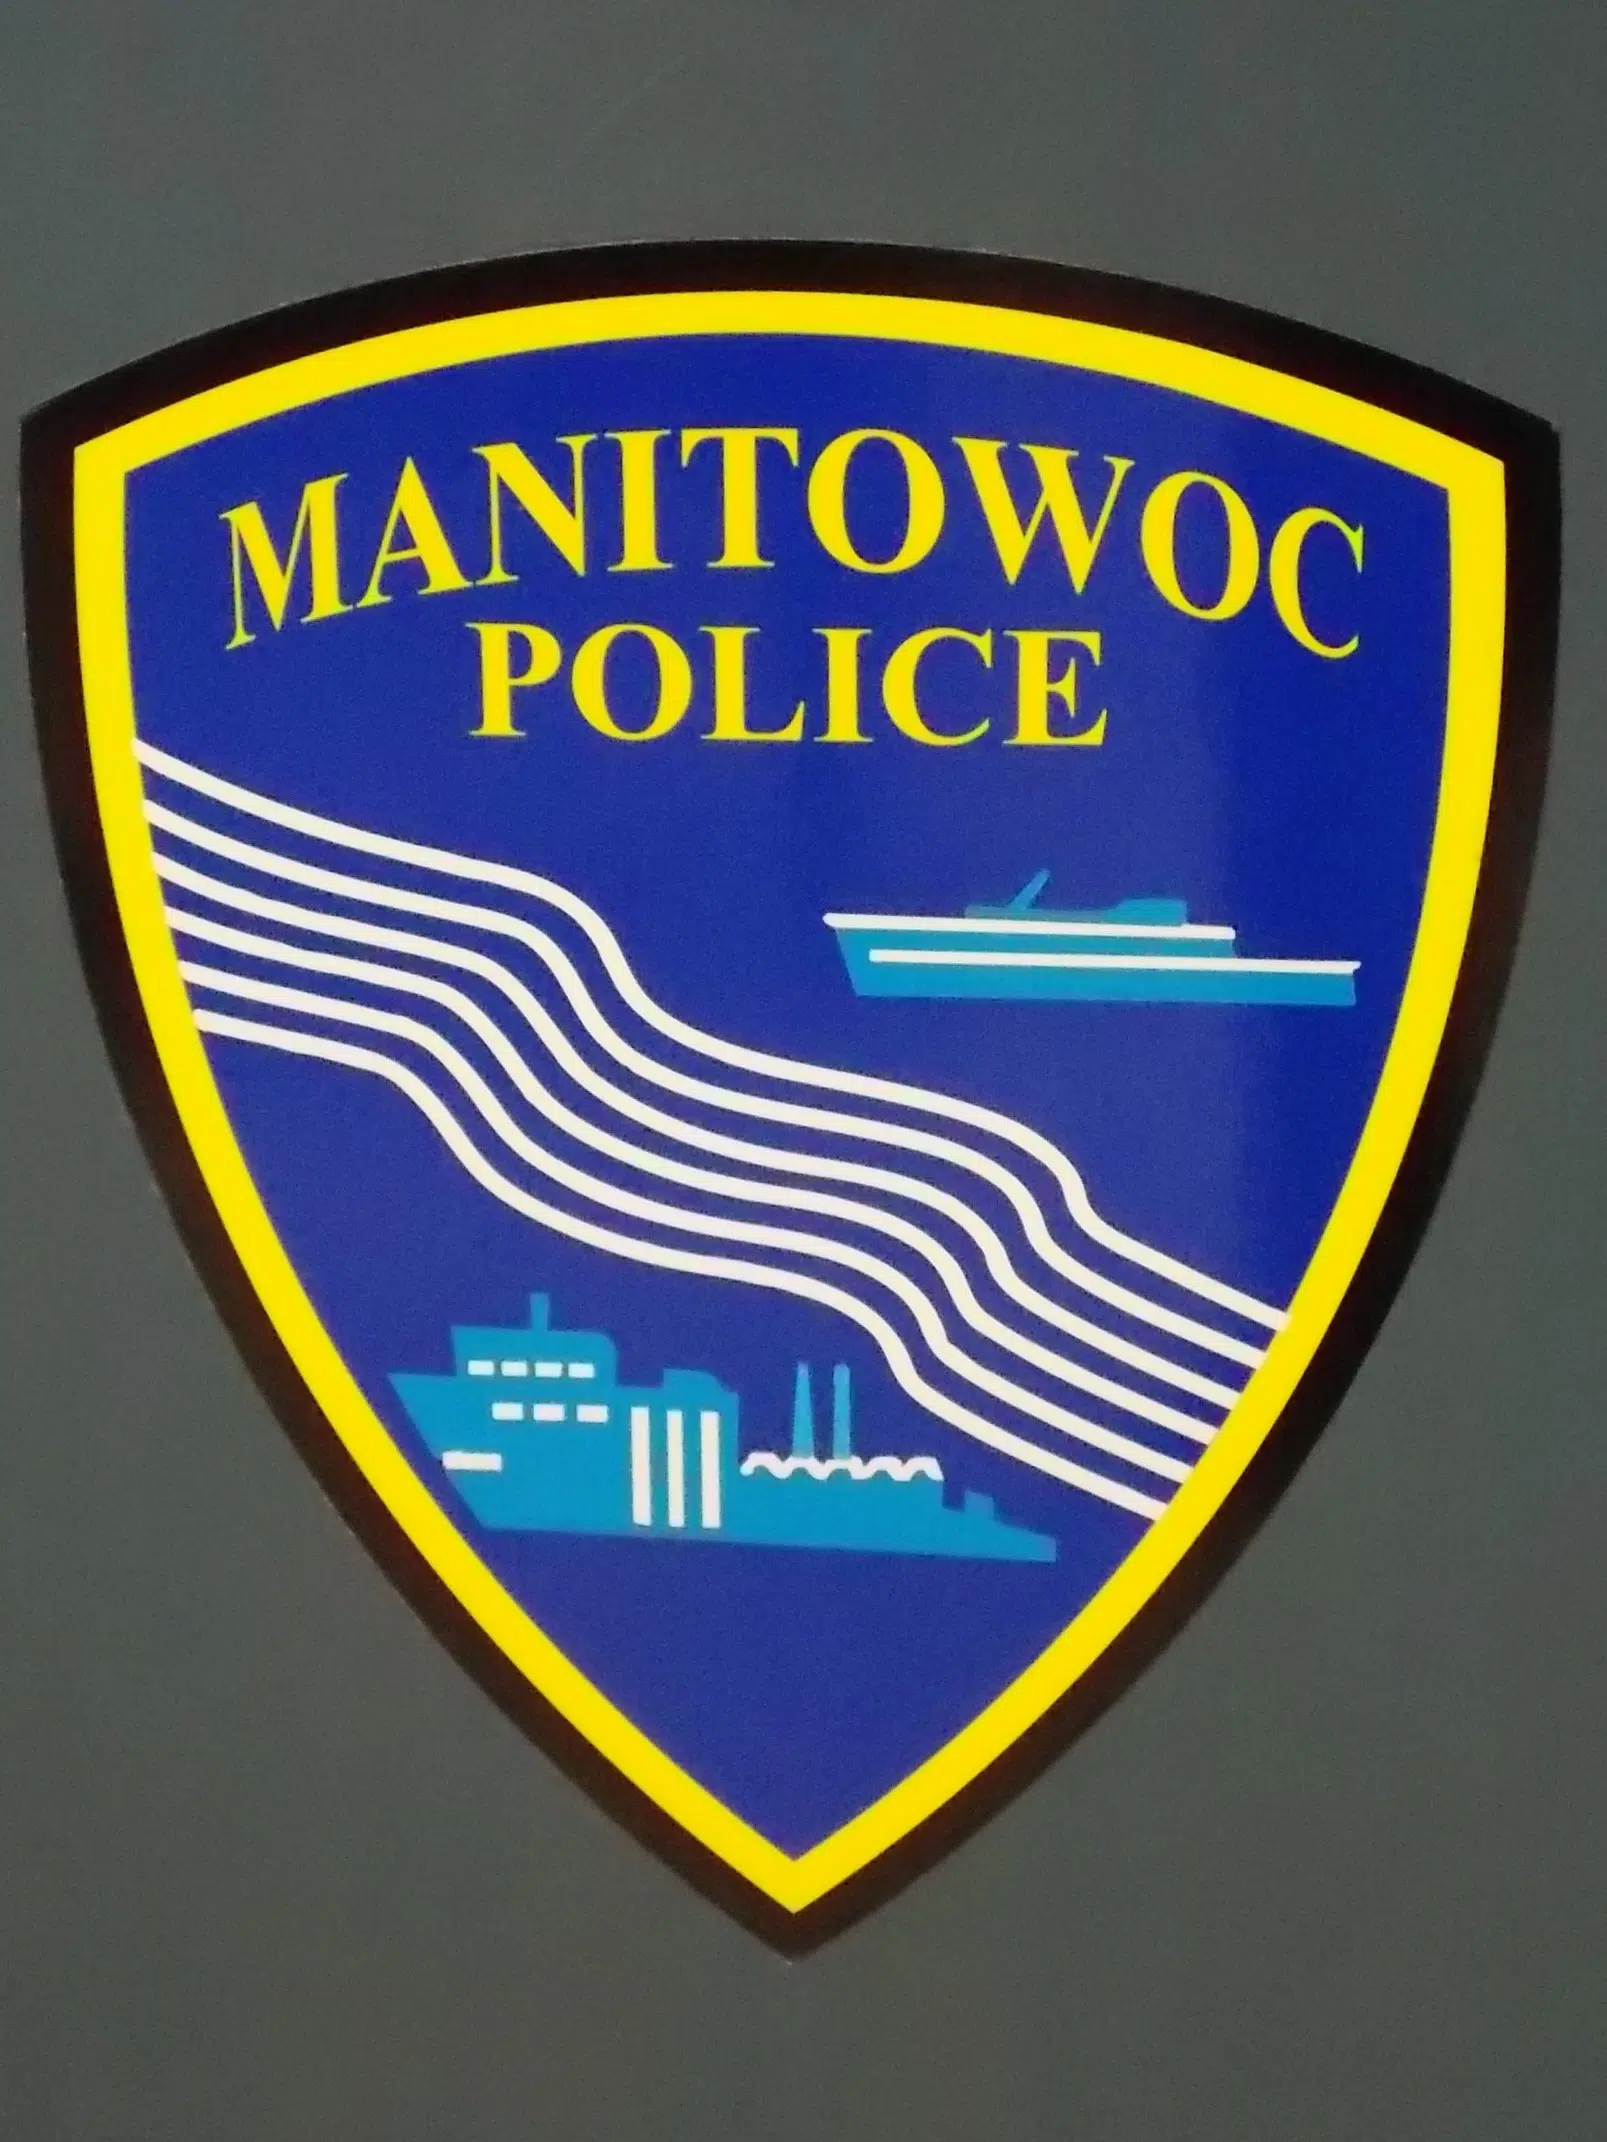 Two Arrested for Drugs Near Manitowoc Elementary School